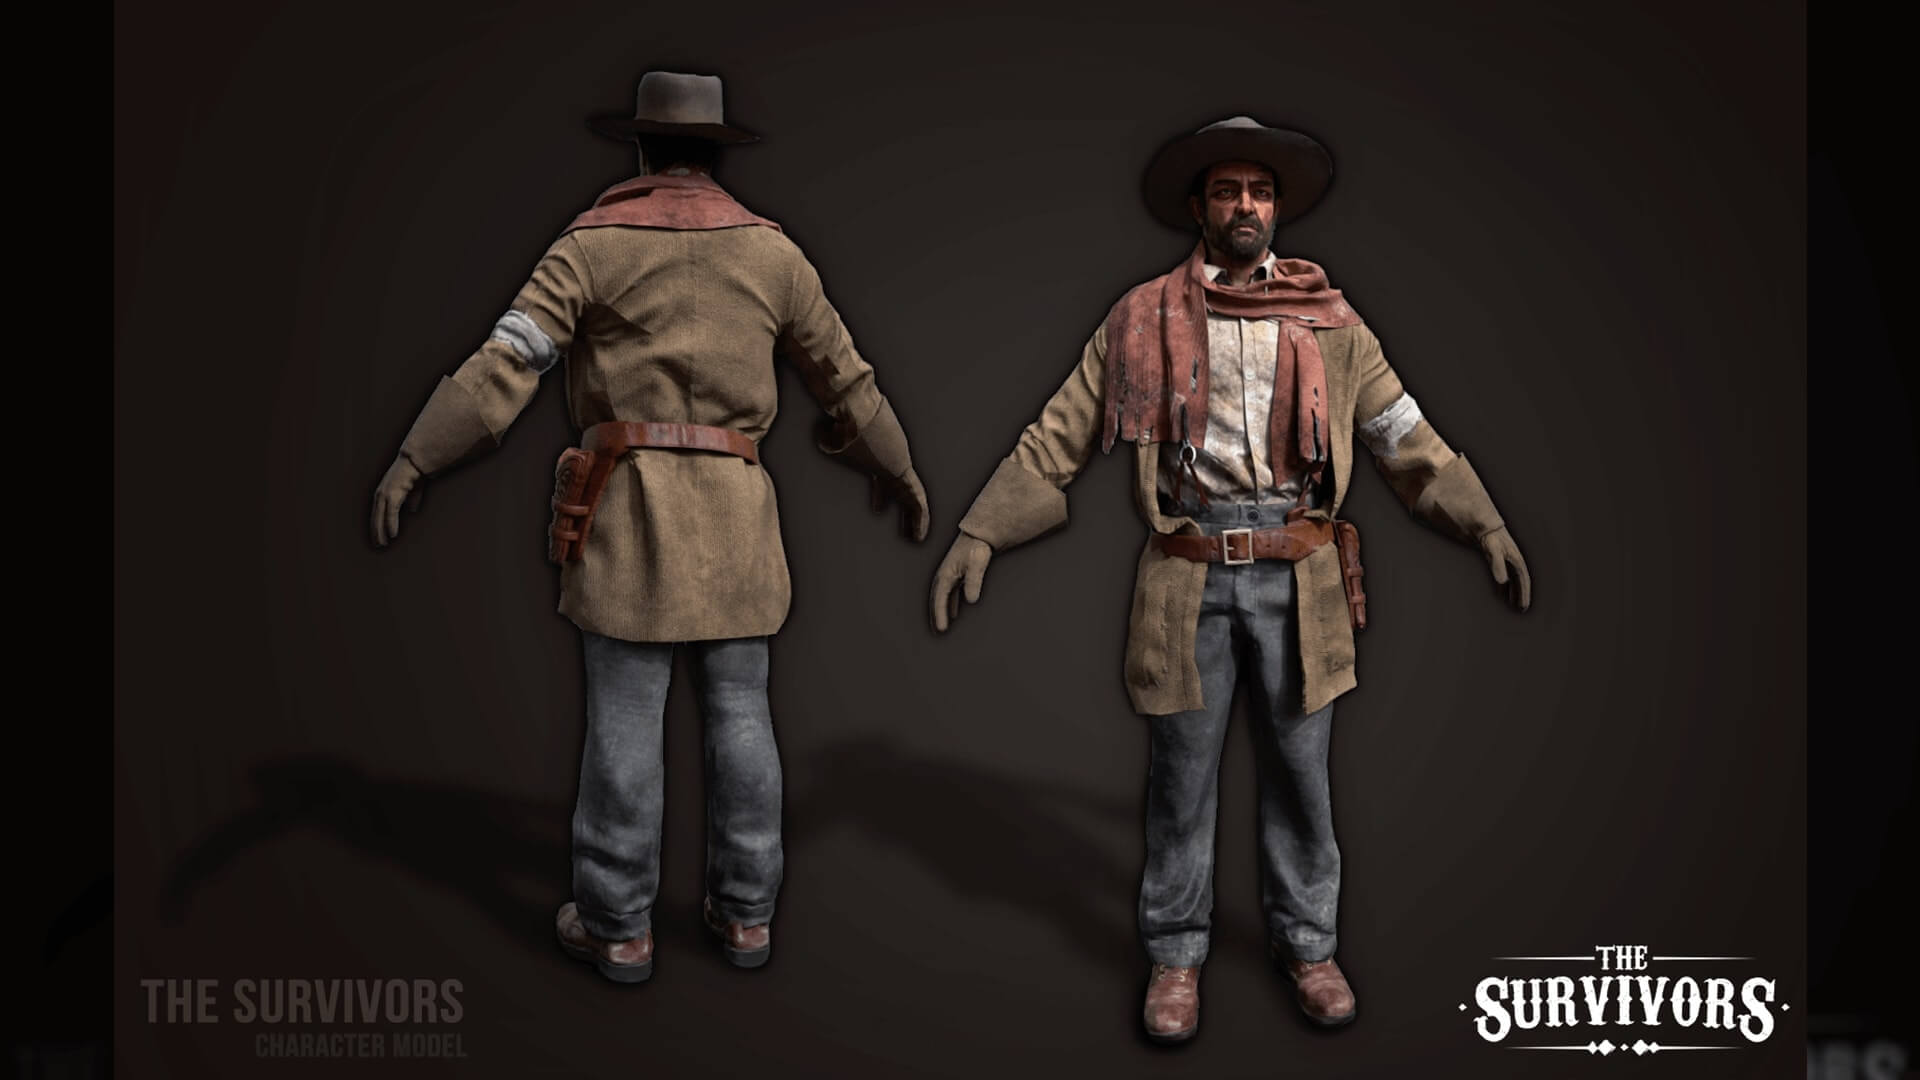 A render of the main character of the game, ready for the cold weather with a cowboy hat.